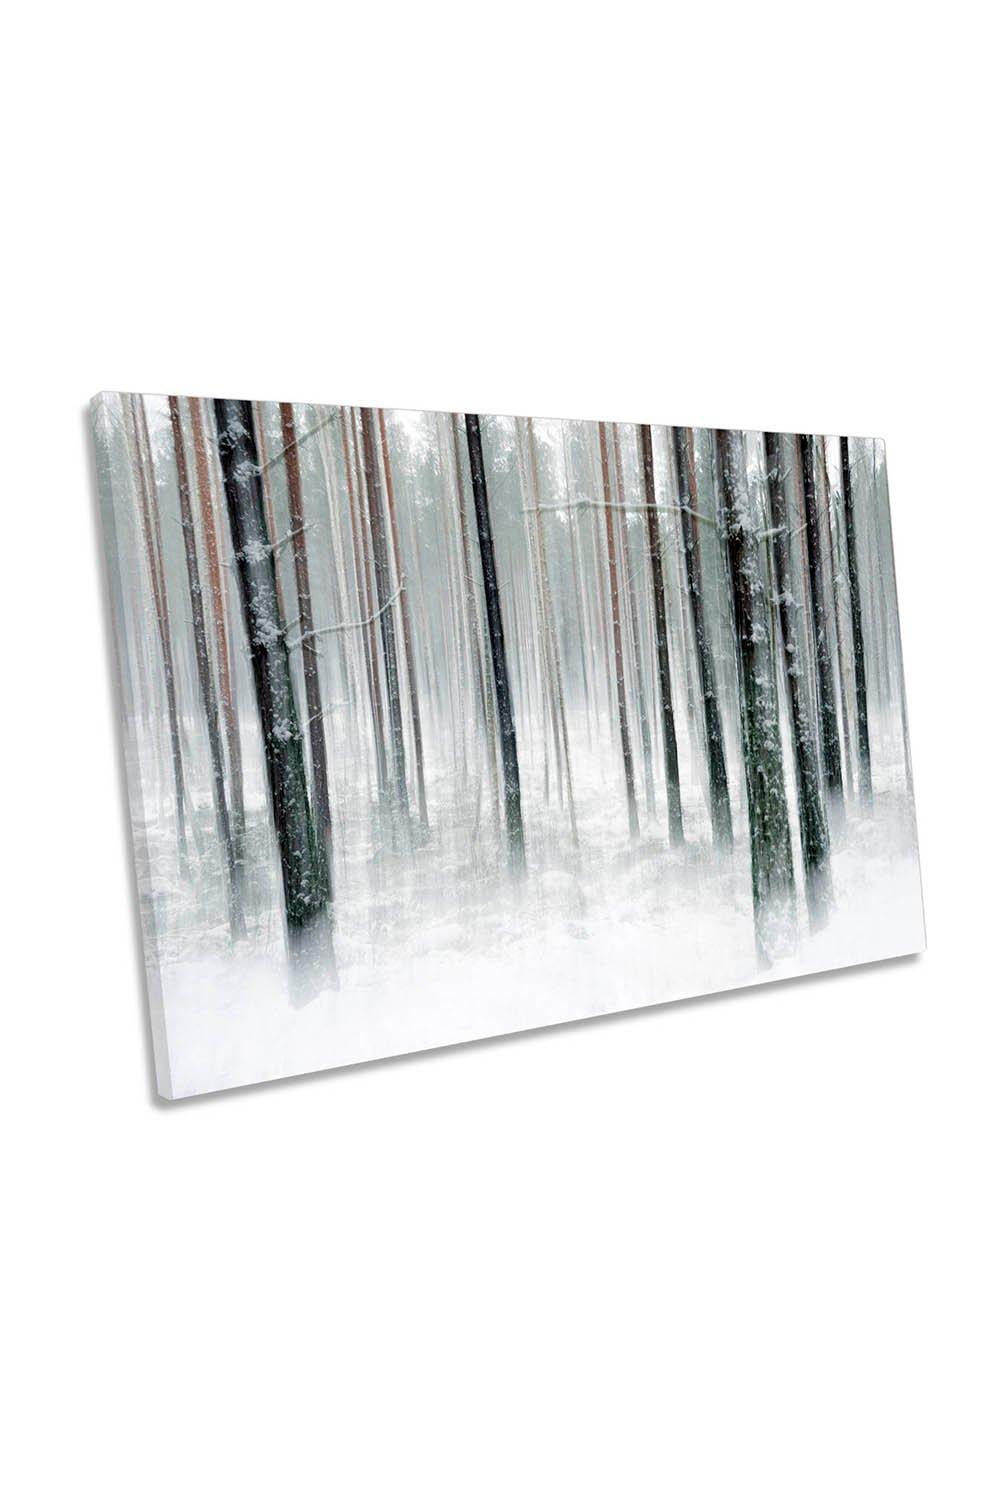 Winter Forest Snowy Landscape White Canvas Wall Art Picture Print